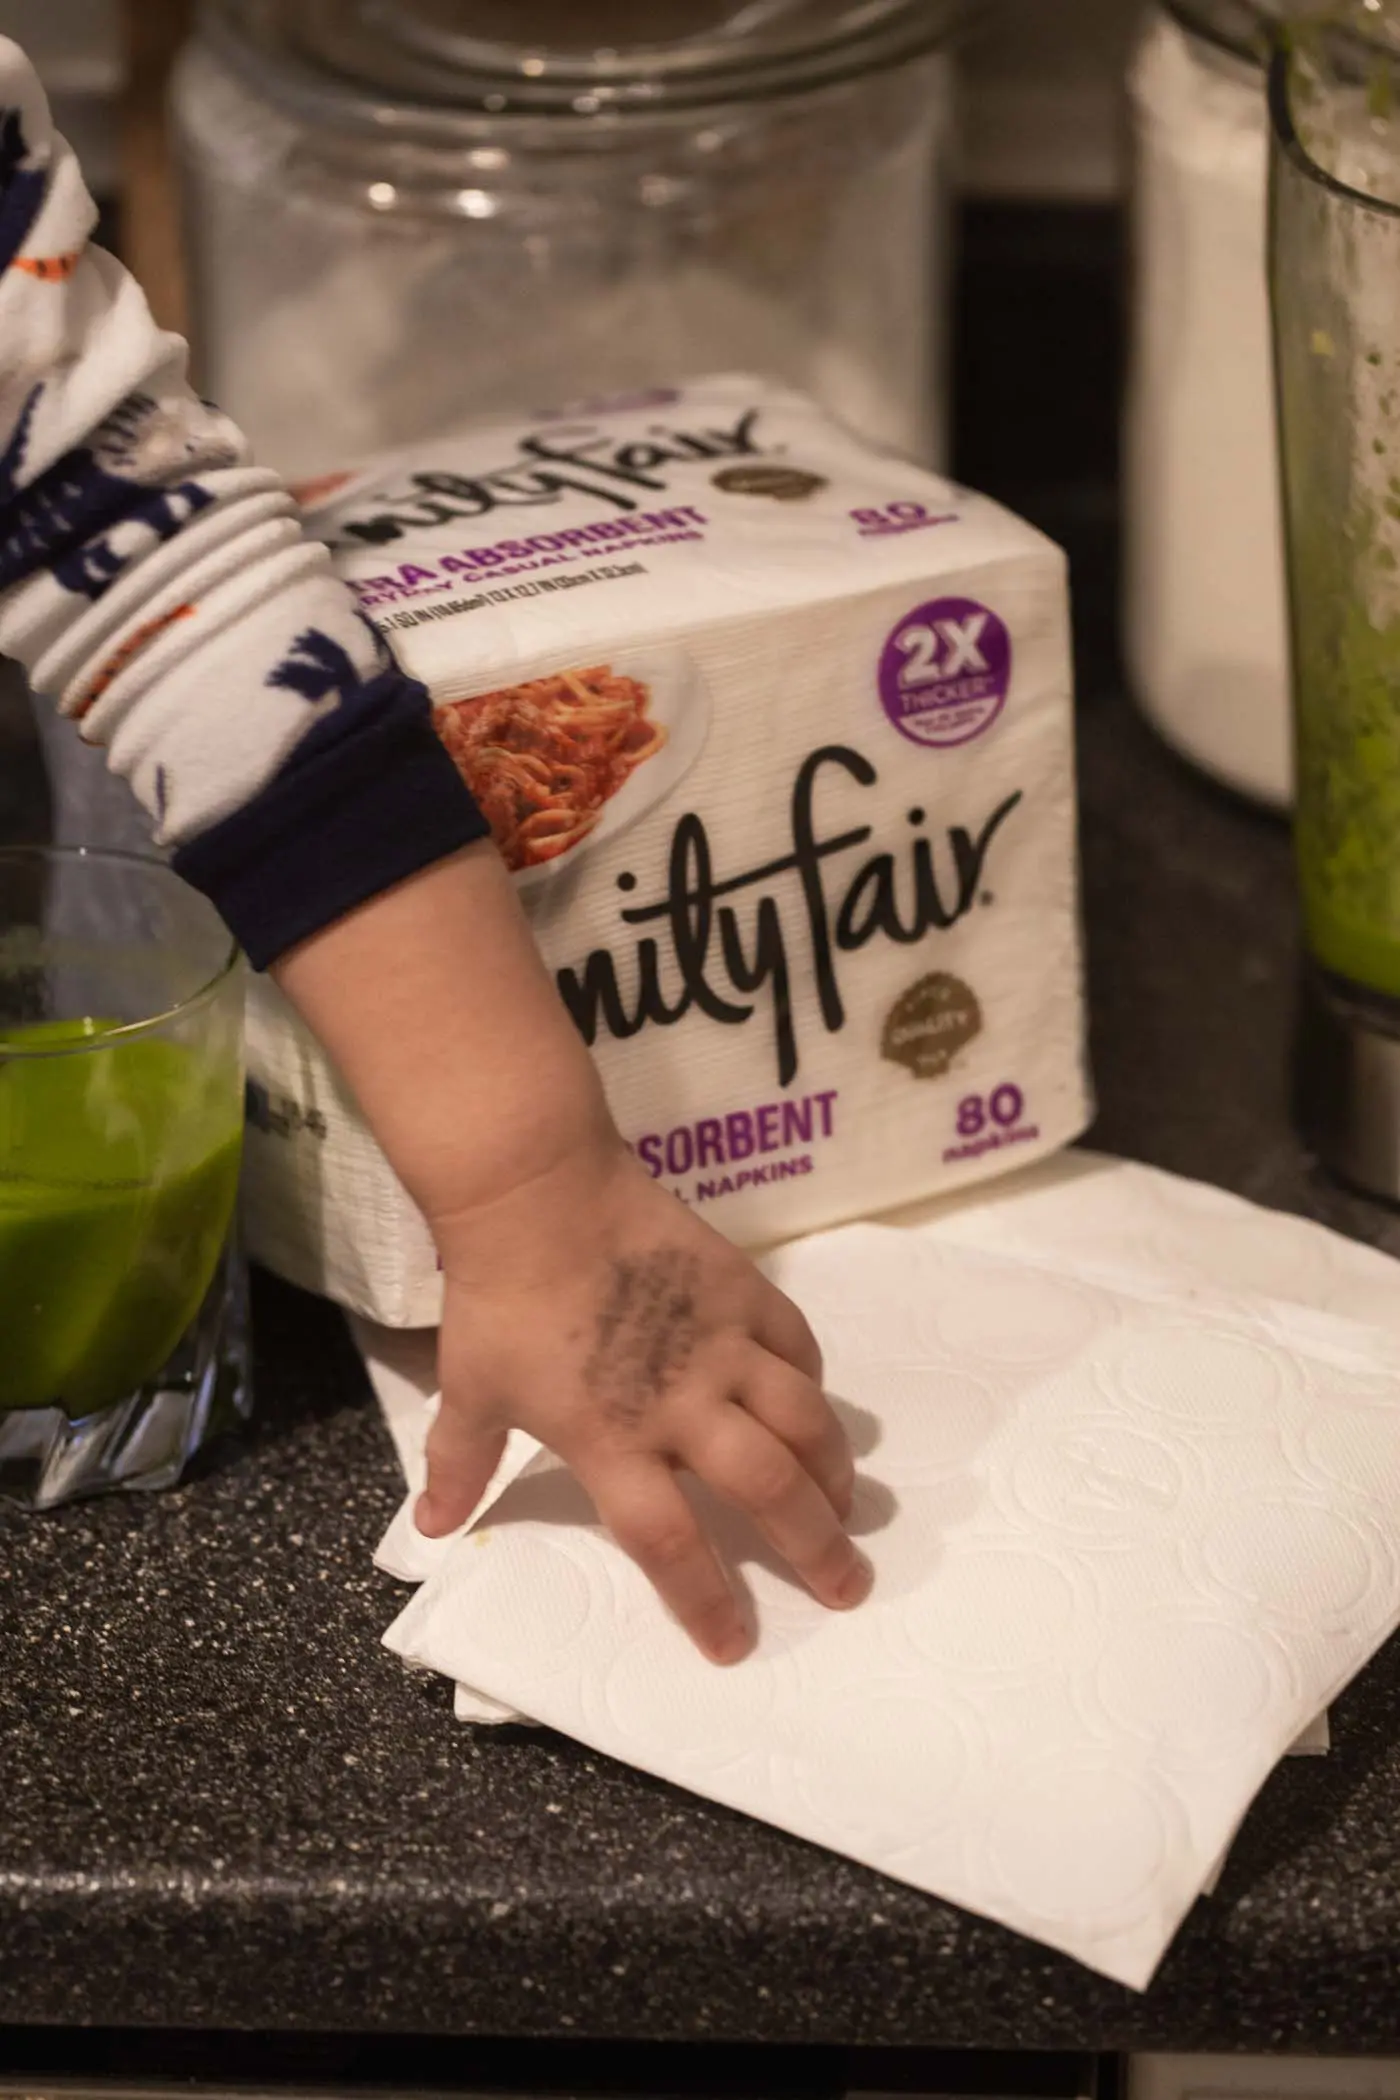 Vanity Fair Napkins and Our Favorite Green Smoothie